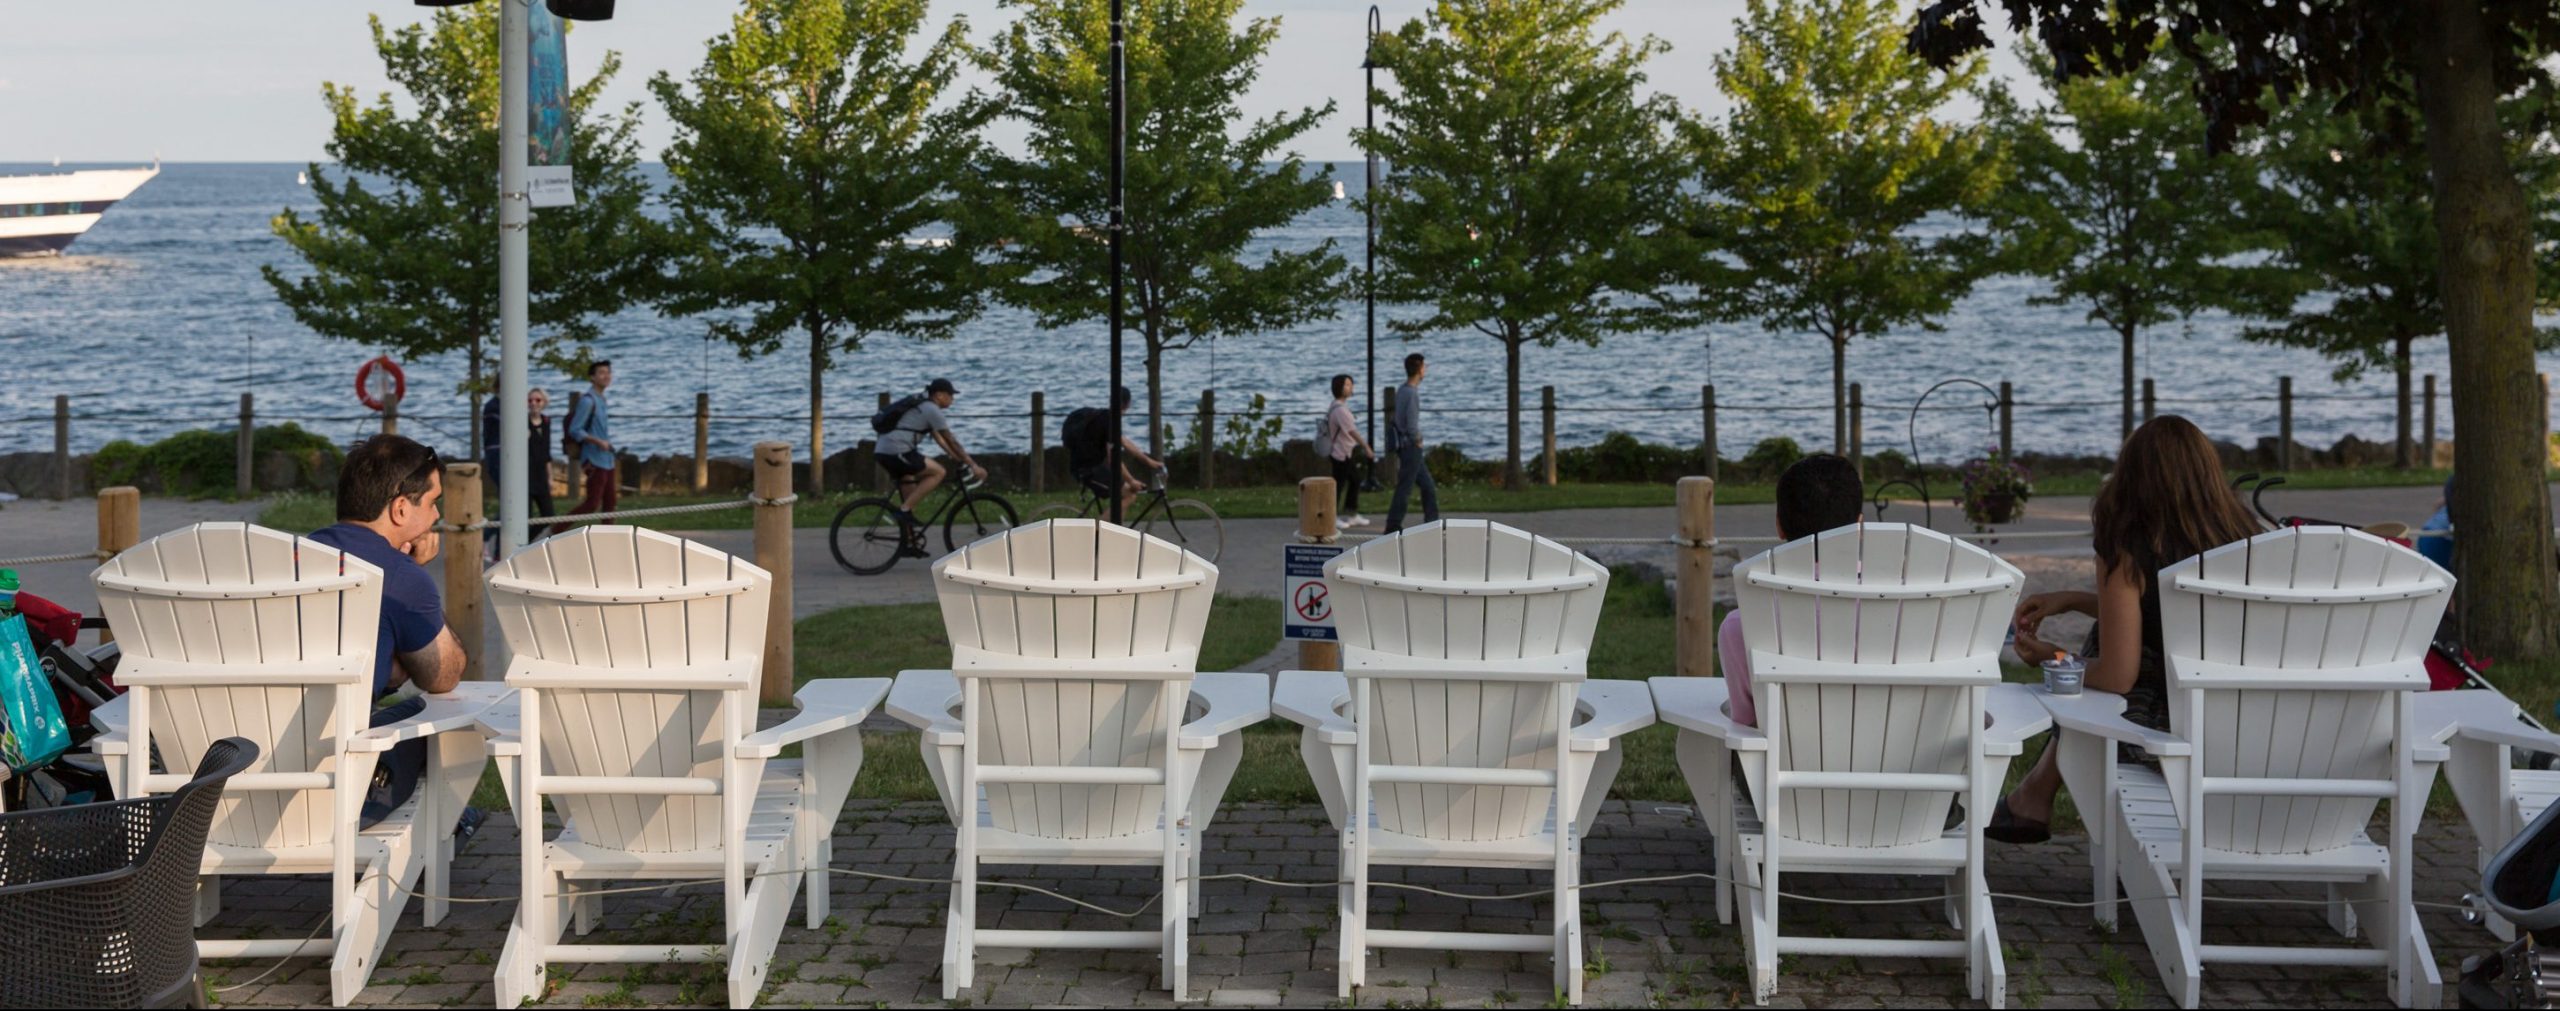 Ontario Place - Chairs by the Waterfront